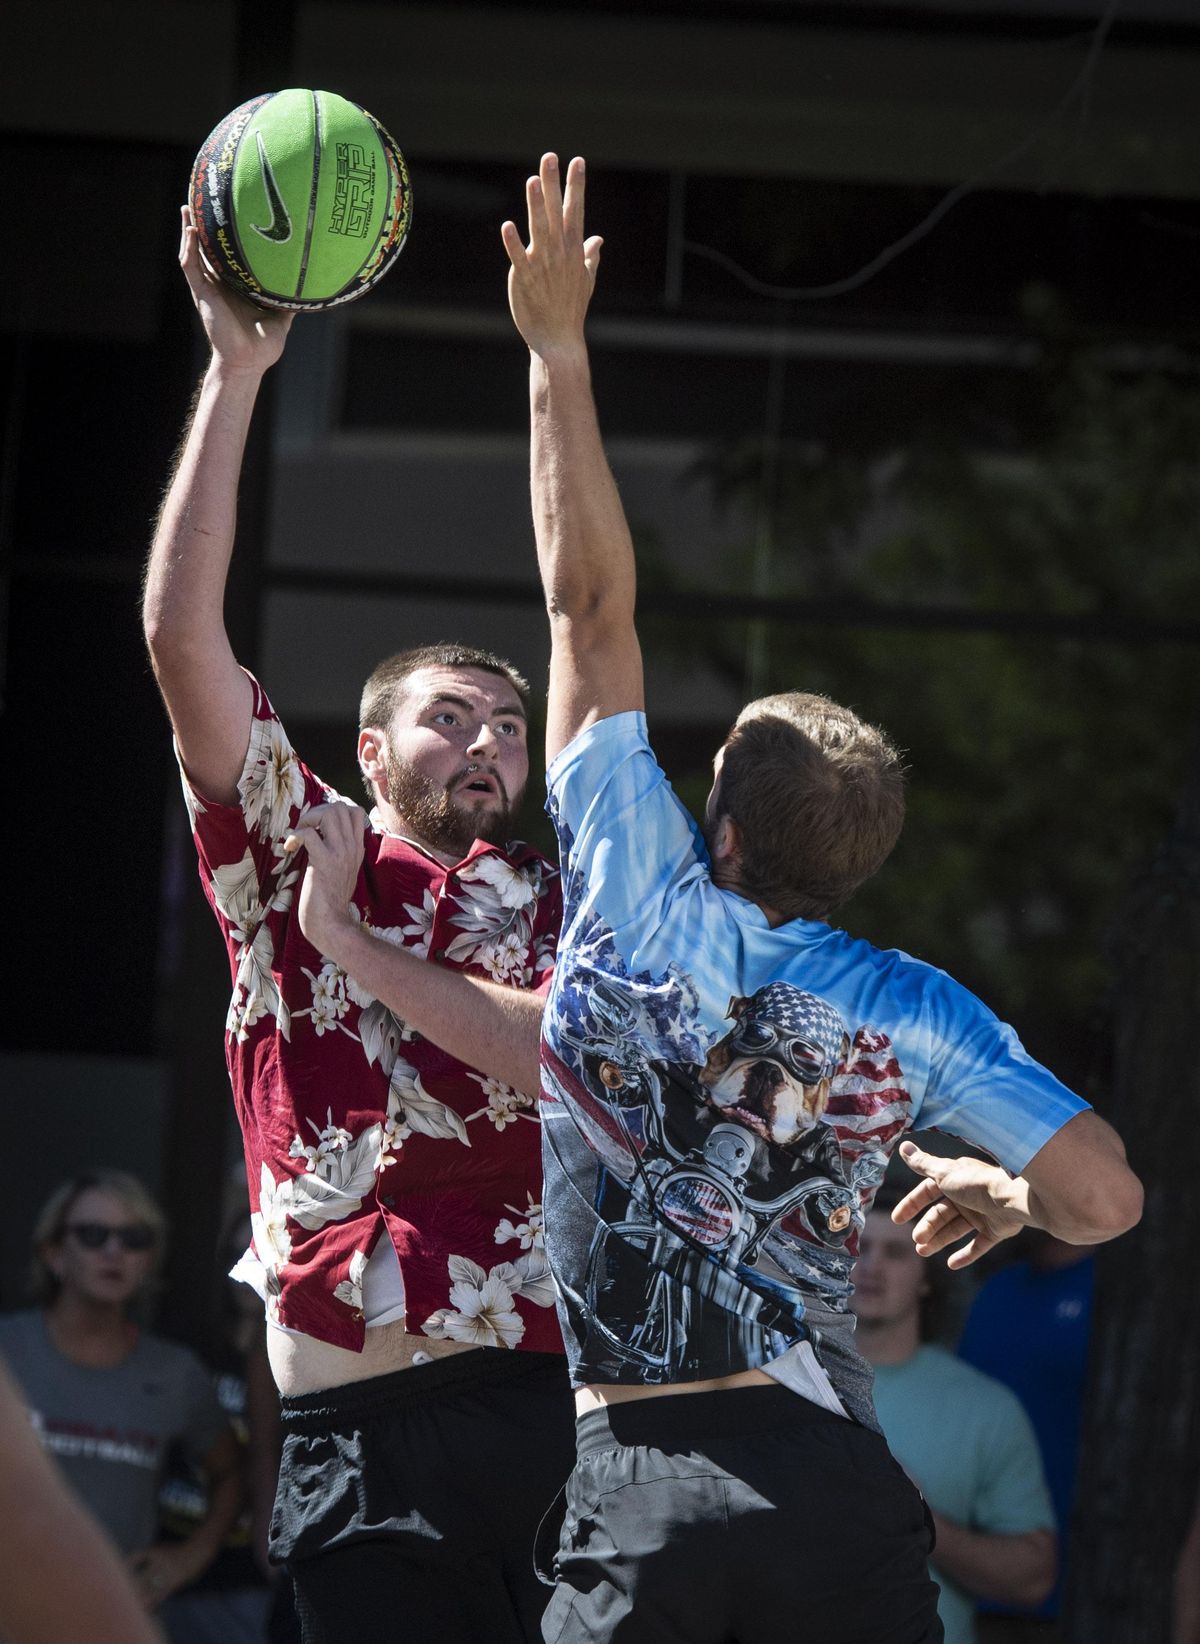 Dressed in a Hawaiian shirt, Redmond Groves with team Hawaiian Punch, takes a shot over a Wild Dawgs opponent Nick McGill during their Hoopfest game on West Riverside Avenue, Sunday July 1, 2018.  Colin Mulvany/THE SPOKESMAN-REVIEW (Colin Mulvany / The Spokesman-Review)